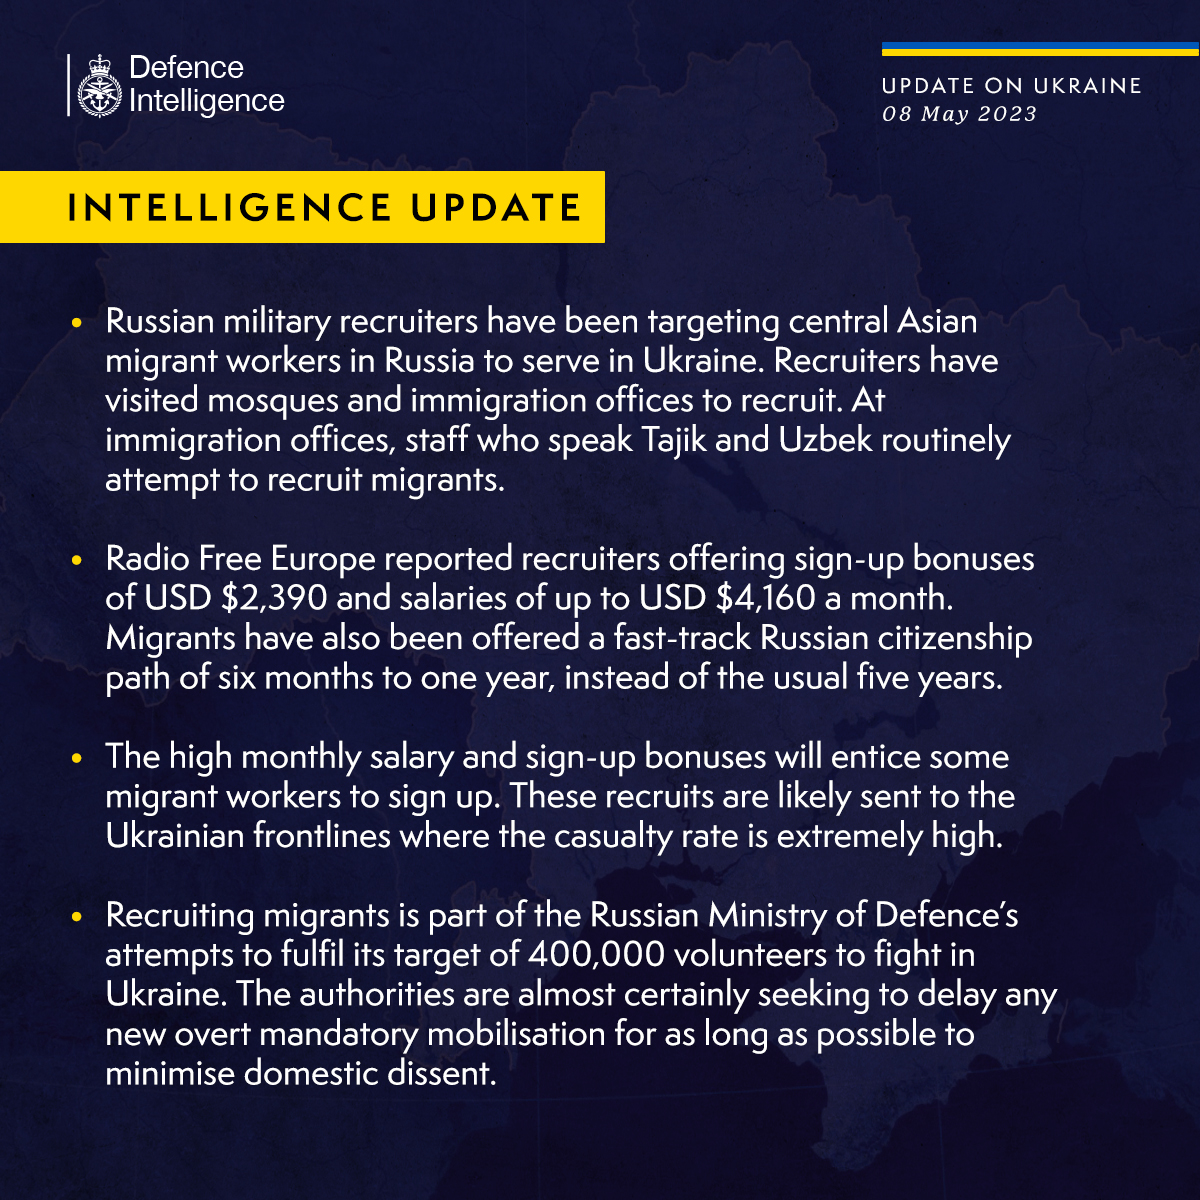 The UK Defense Intelligence Says russians Recruiting Central Asian Migrant Workers to kill Ukrainians for Money, Russian Passport, Defense Express